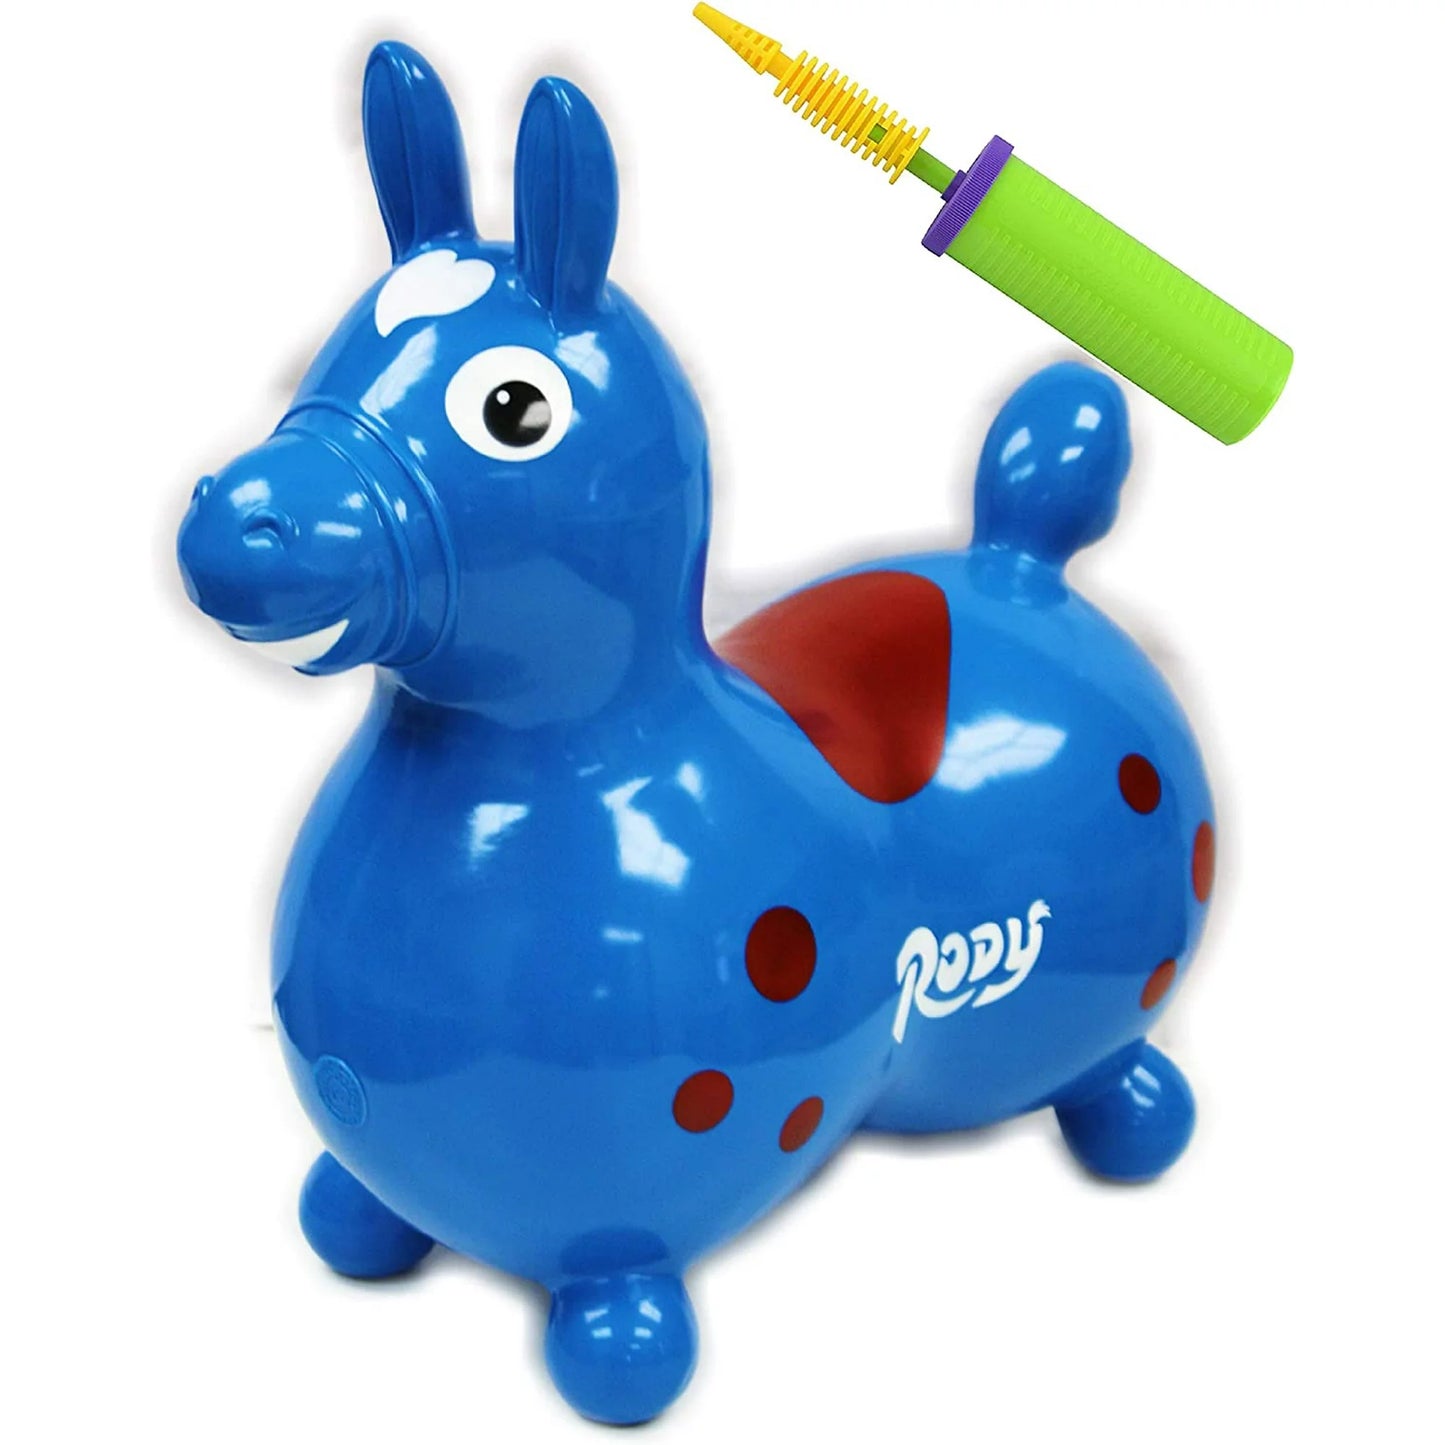 New in Box Gymnic Rody Horse Riding Toy (Blue)